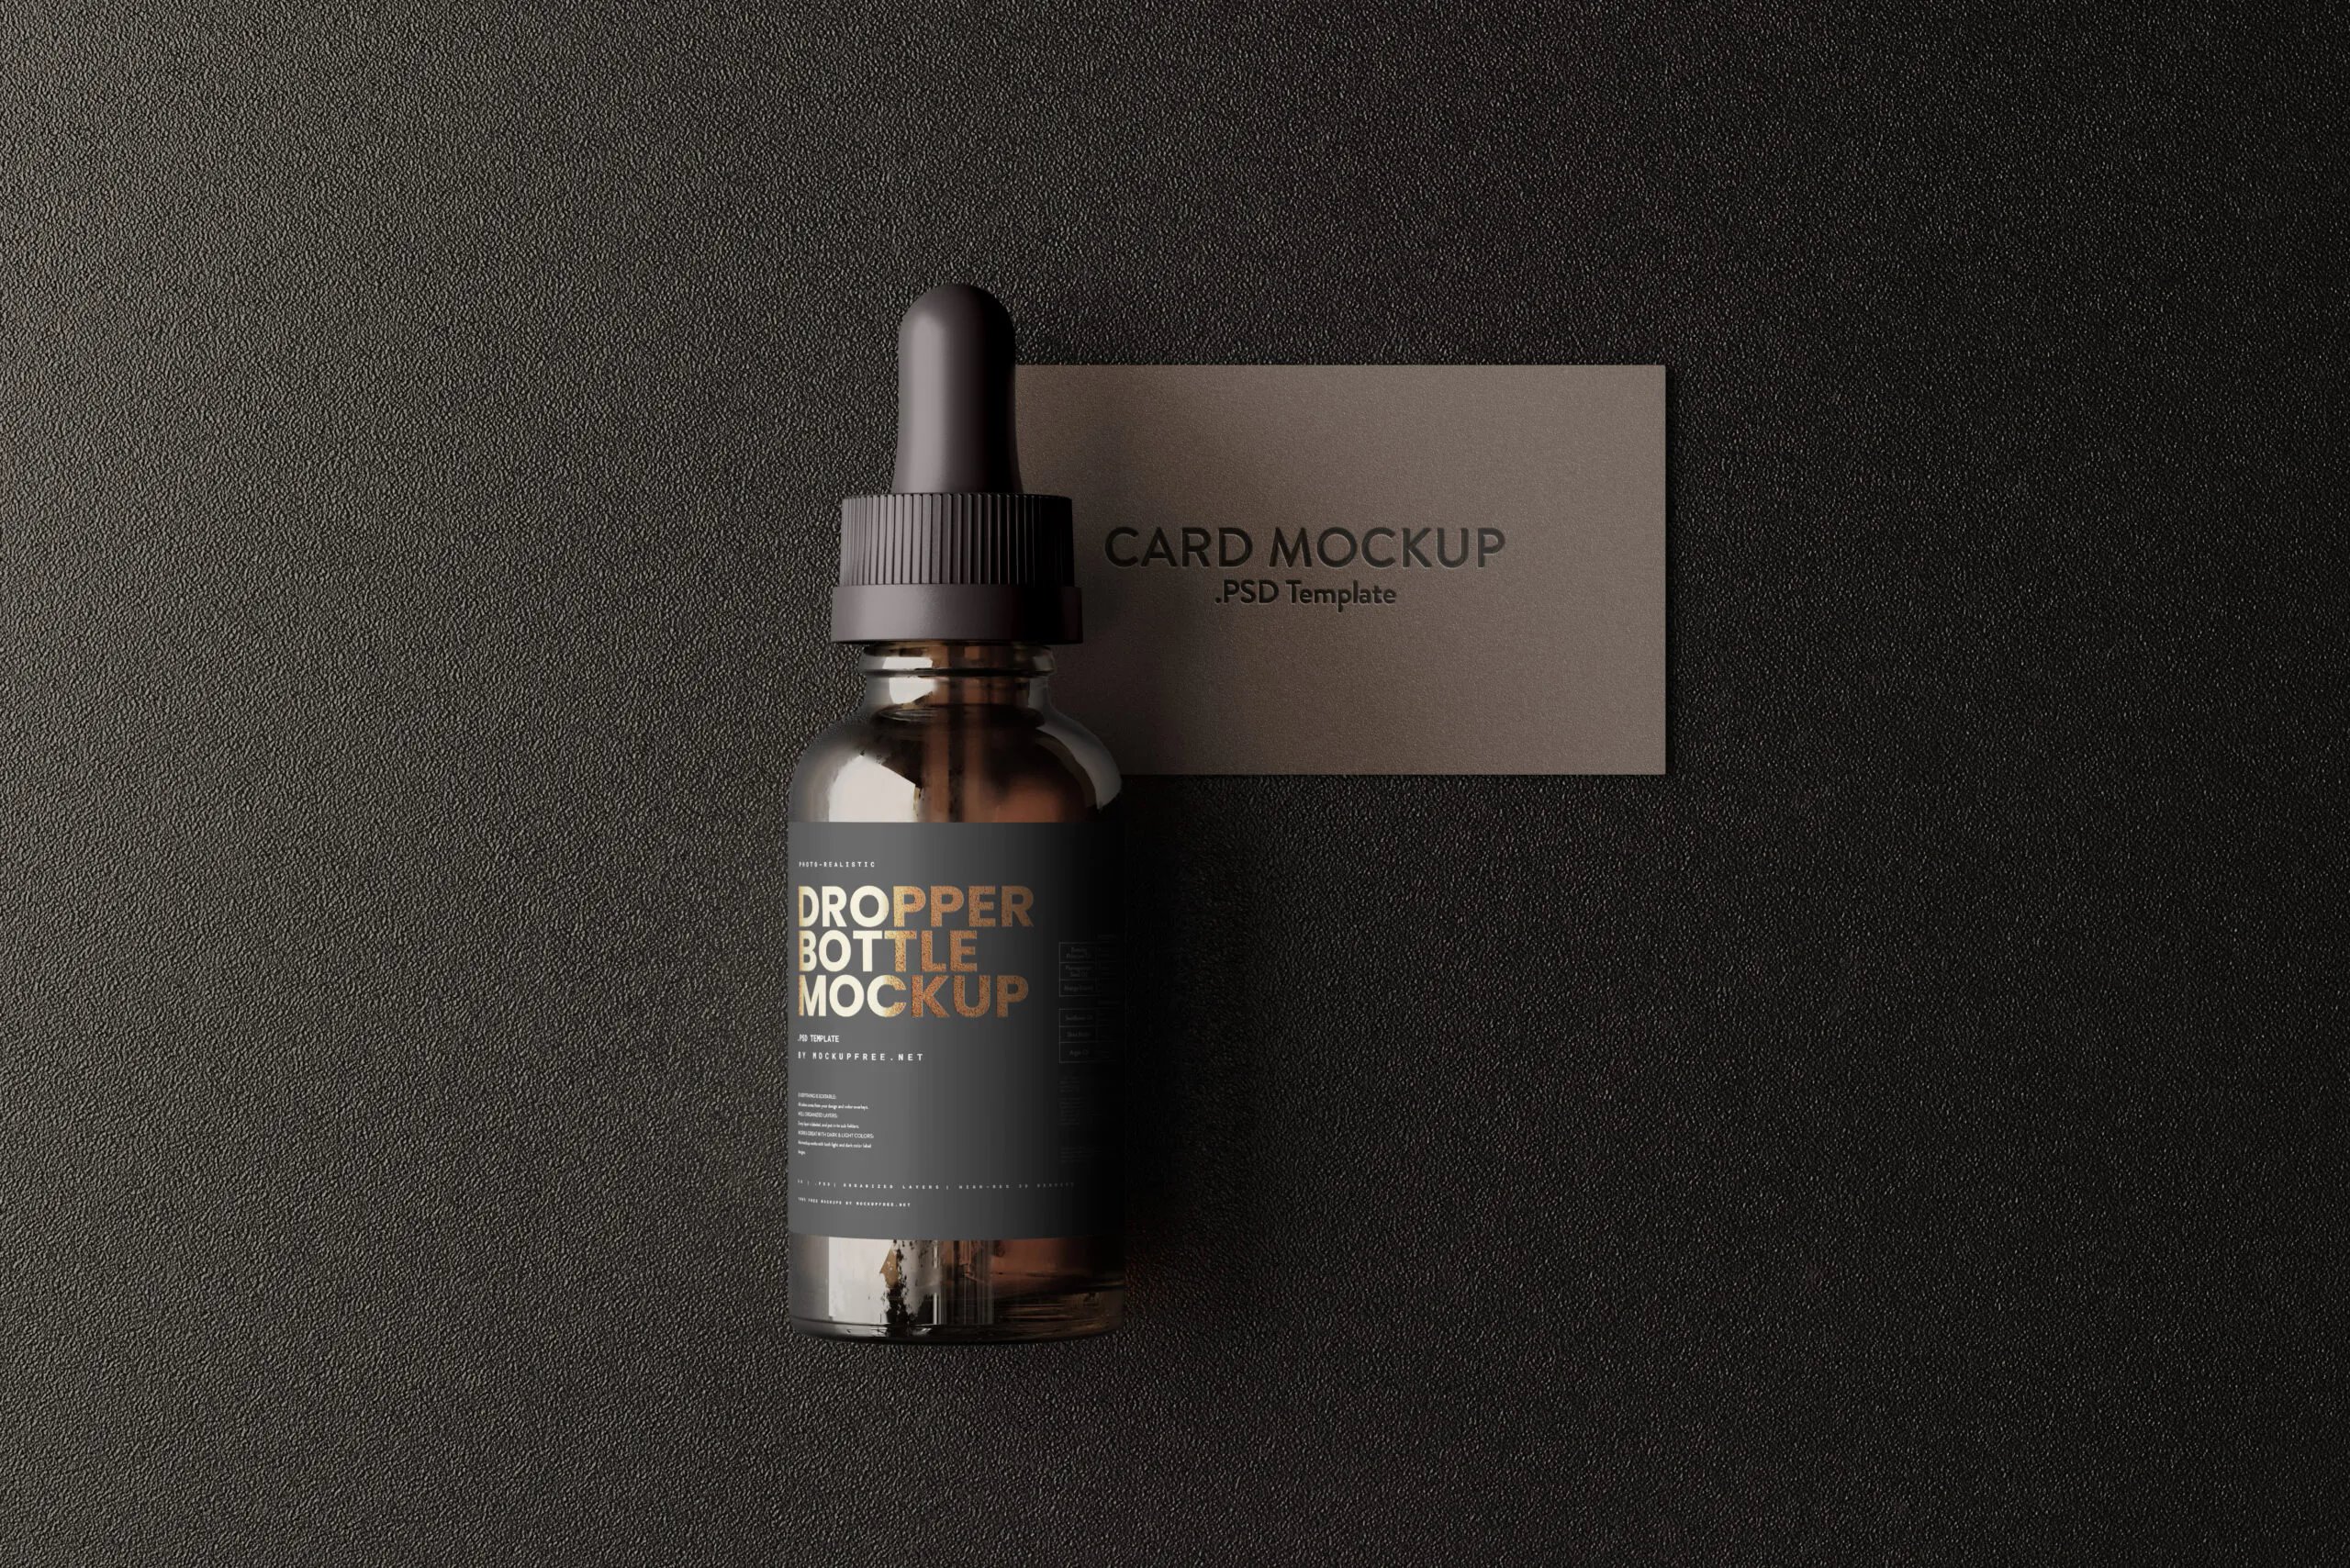 5 Dropper Bottle Mockups with Business Card in Different Views FREE PSD